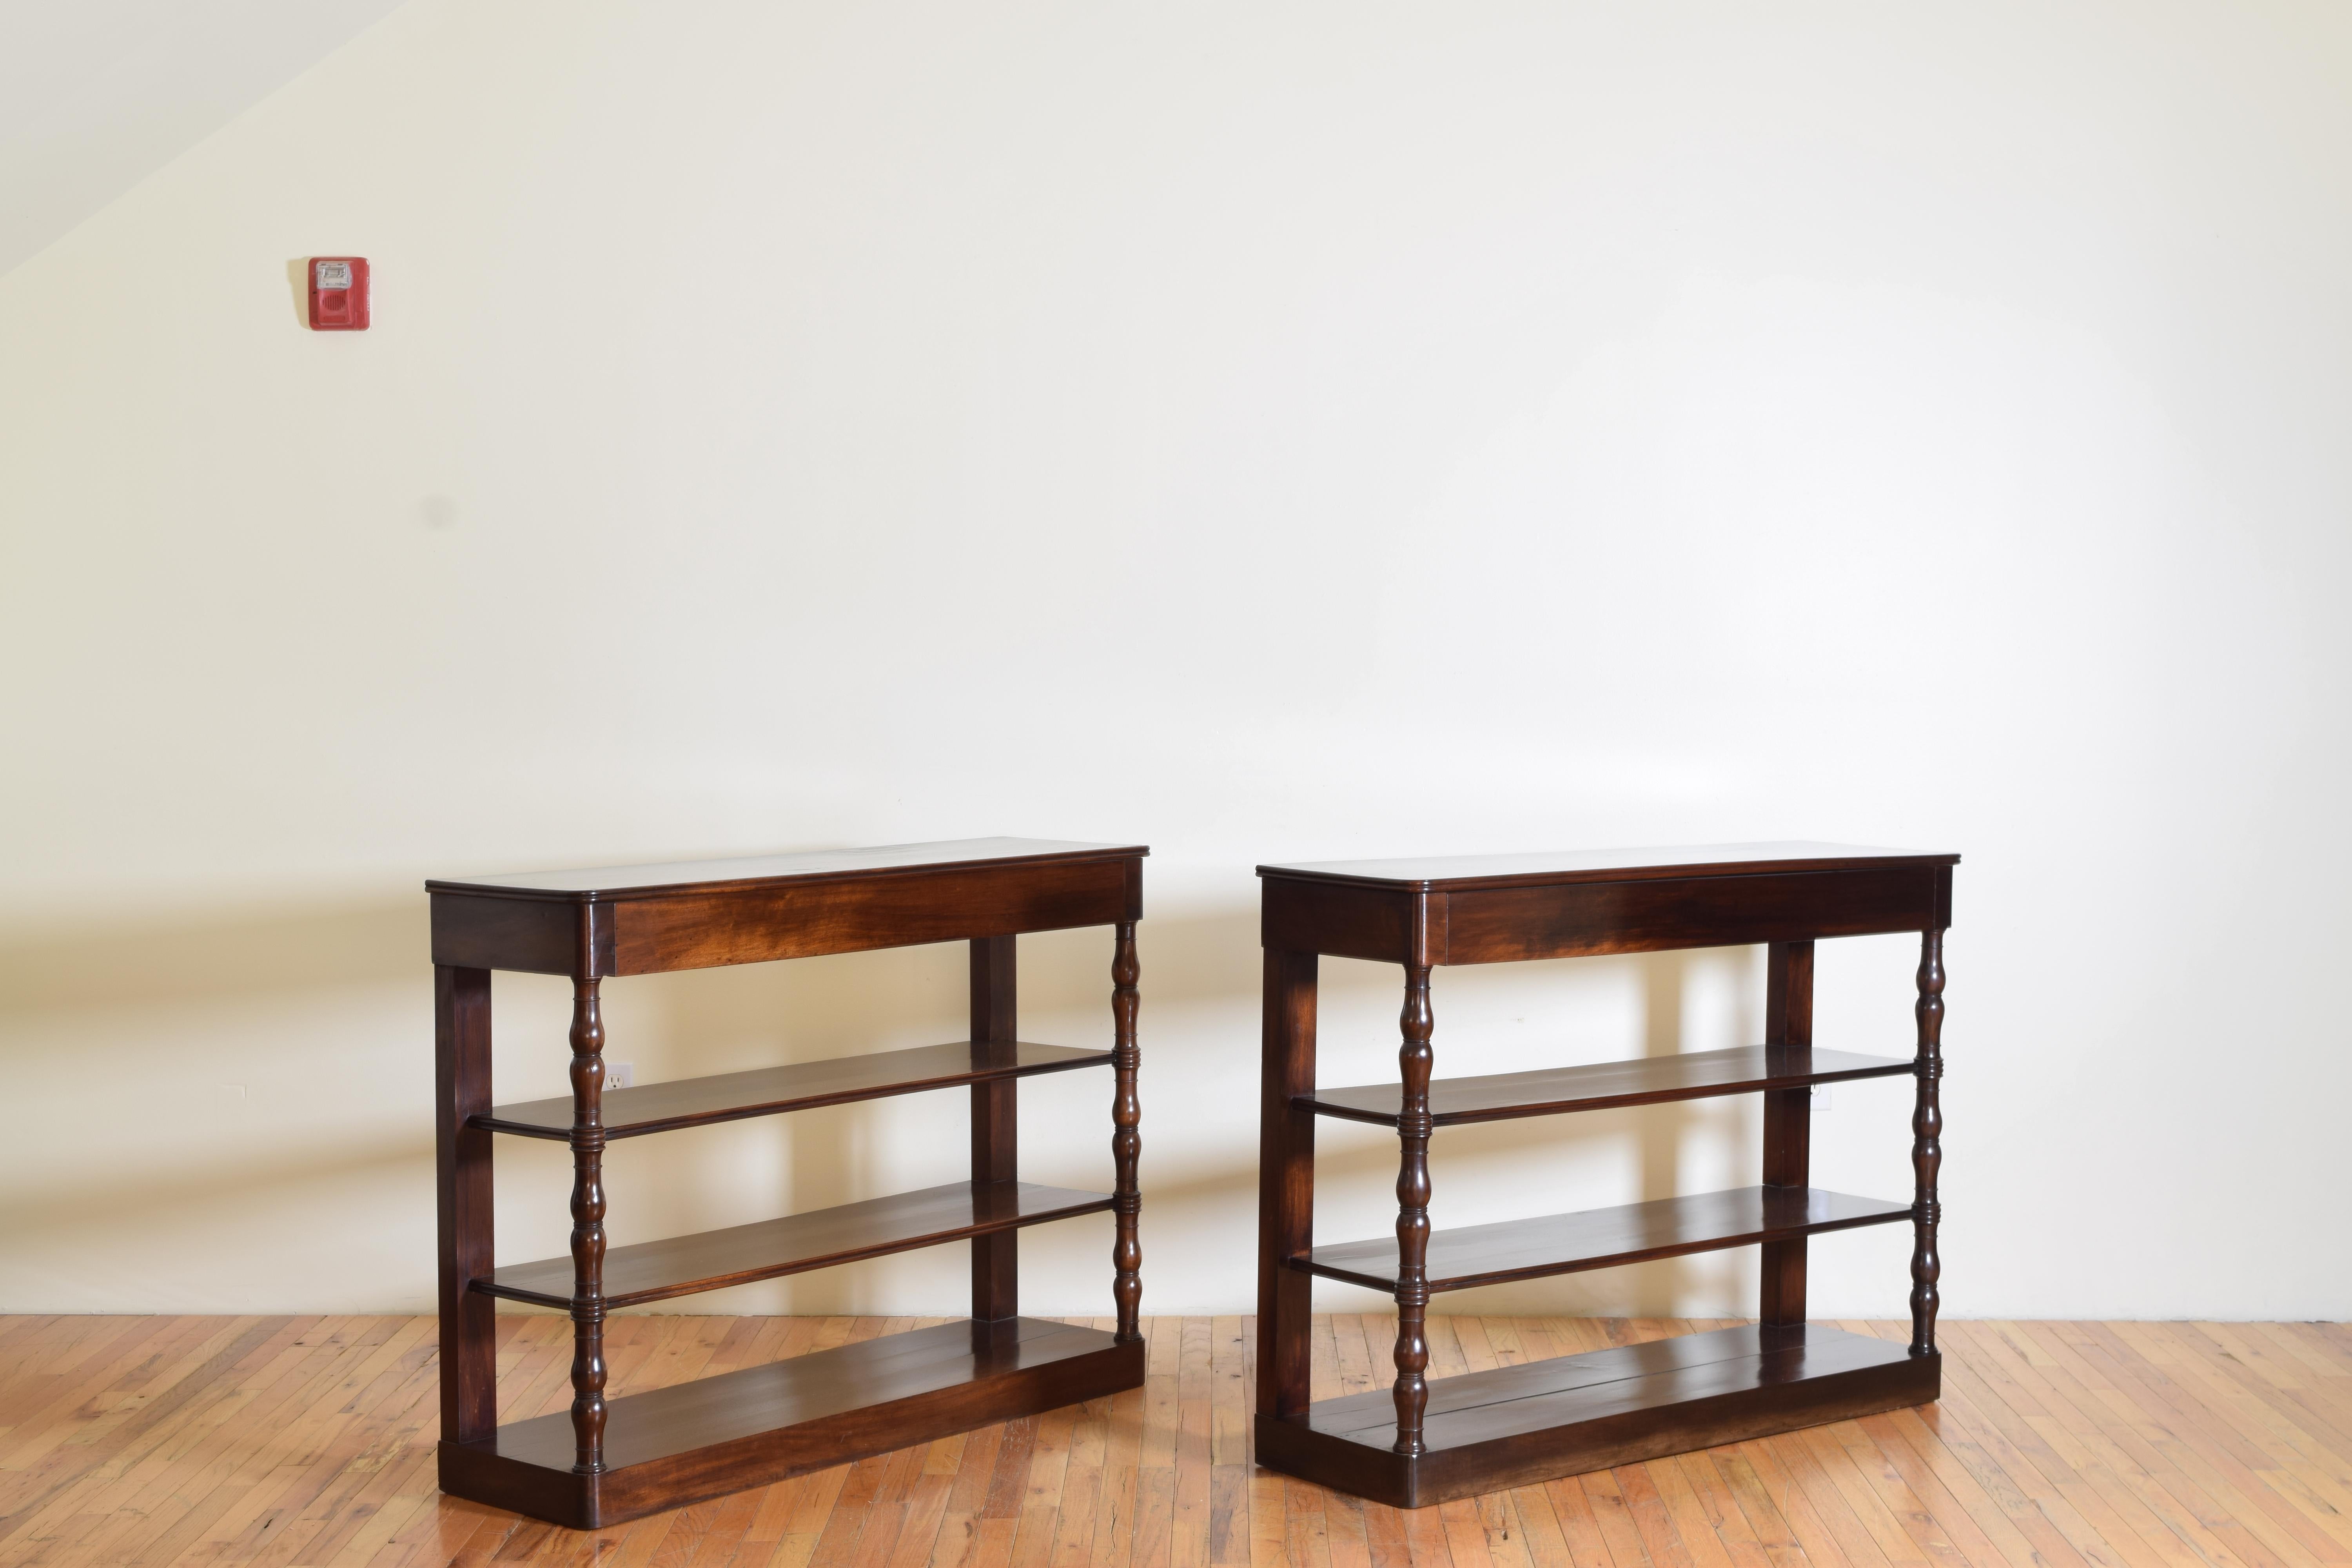 Each having a rectangular top with rounded front corners and molded edges above larger drawers with hidden hand pulls, raised on turned front supports and rear flat supports, connected by two tiers of shelves, the bottom shelves also the bases with